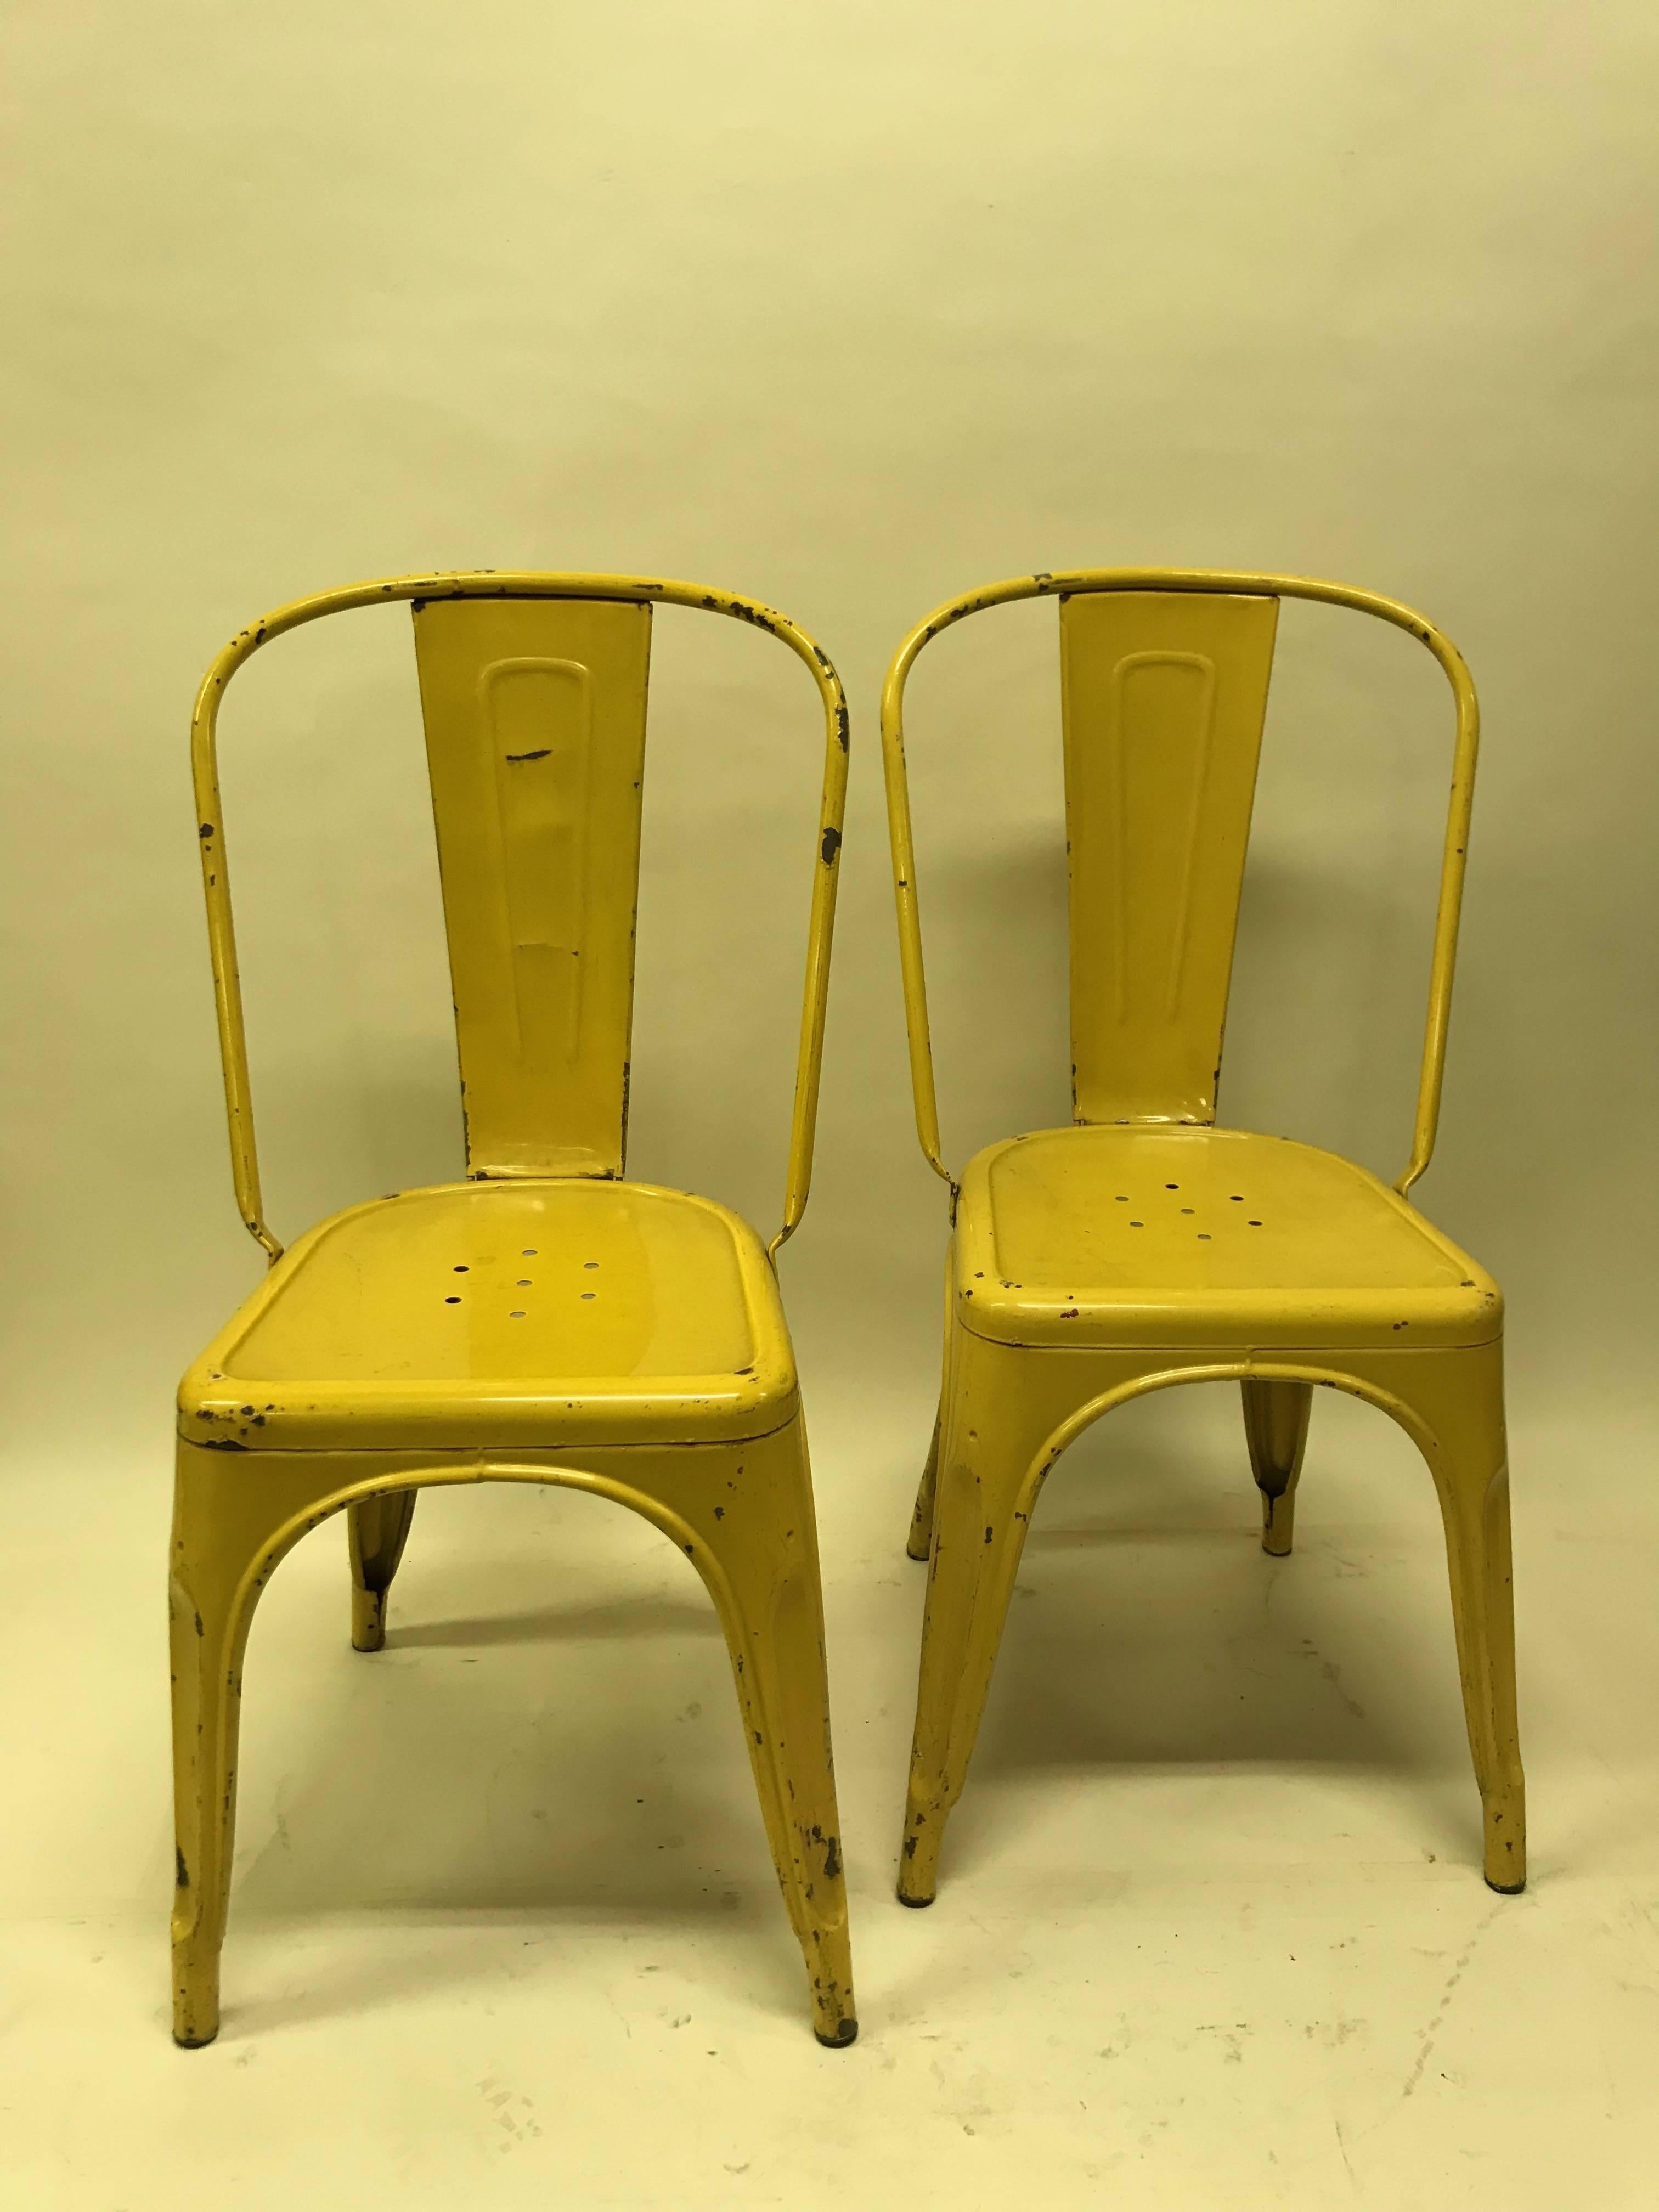 Pair of French bistrot chairs designed by Xavier Pauchard for Tolix. Those chairs presents the very nice yellow color.

Collector’s note:

The Model A chair has become an icon of industrial aesthetics. It’s unfailing popularity since 1934 has